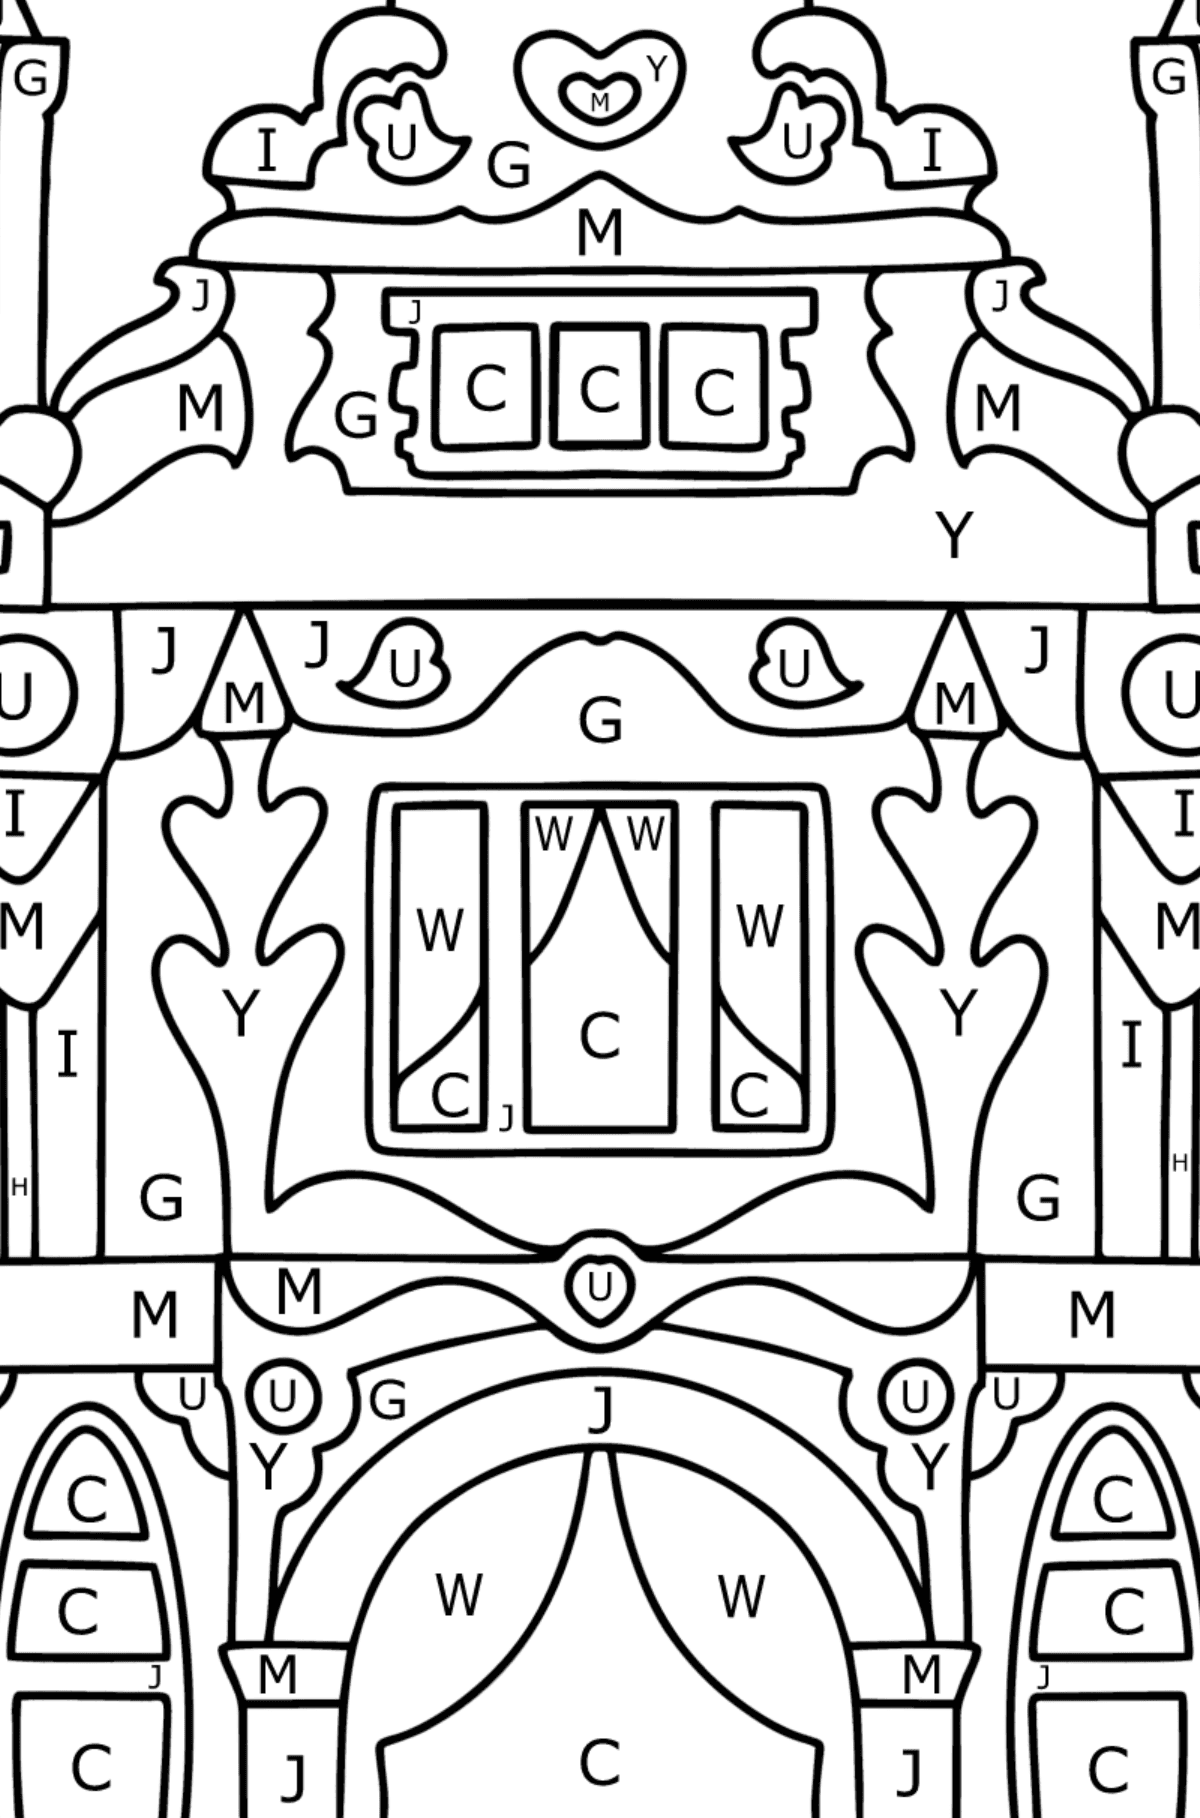 Two Storey House coloring page - Coloring by Letters for Kids